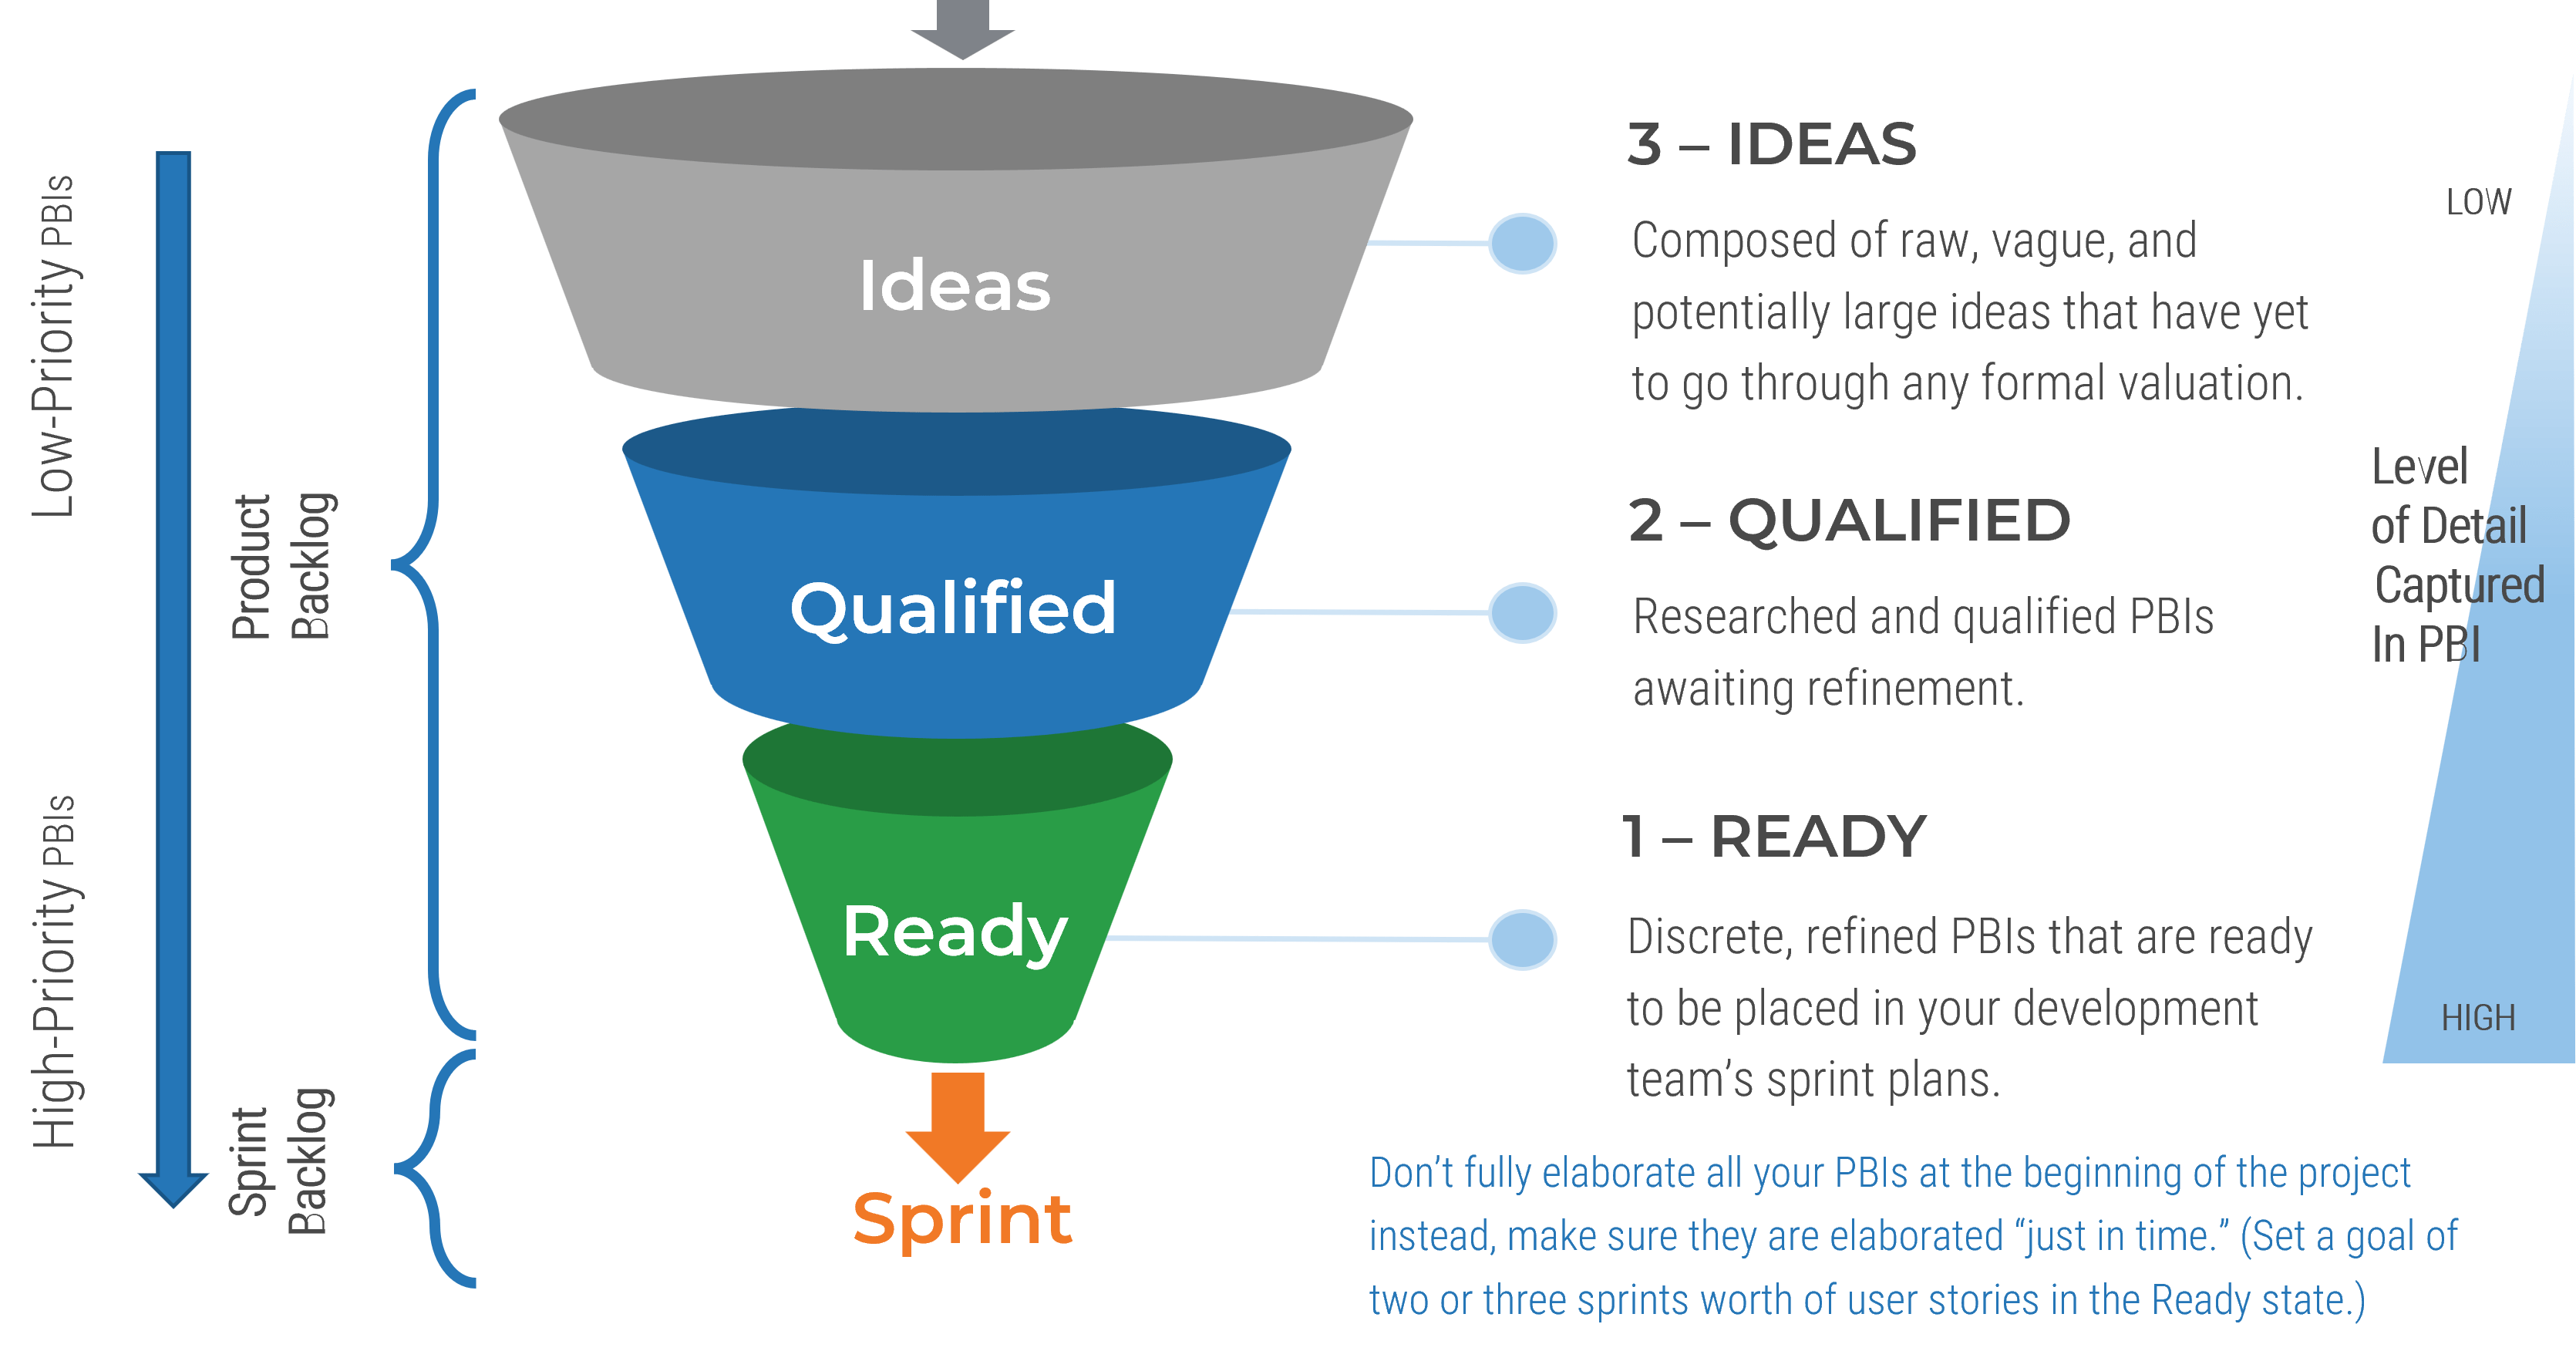 An image showing the Ideas; Qualified; Ready; funnel leading to the sprint approach.